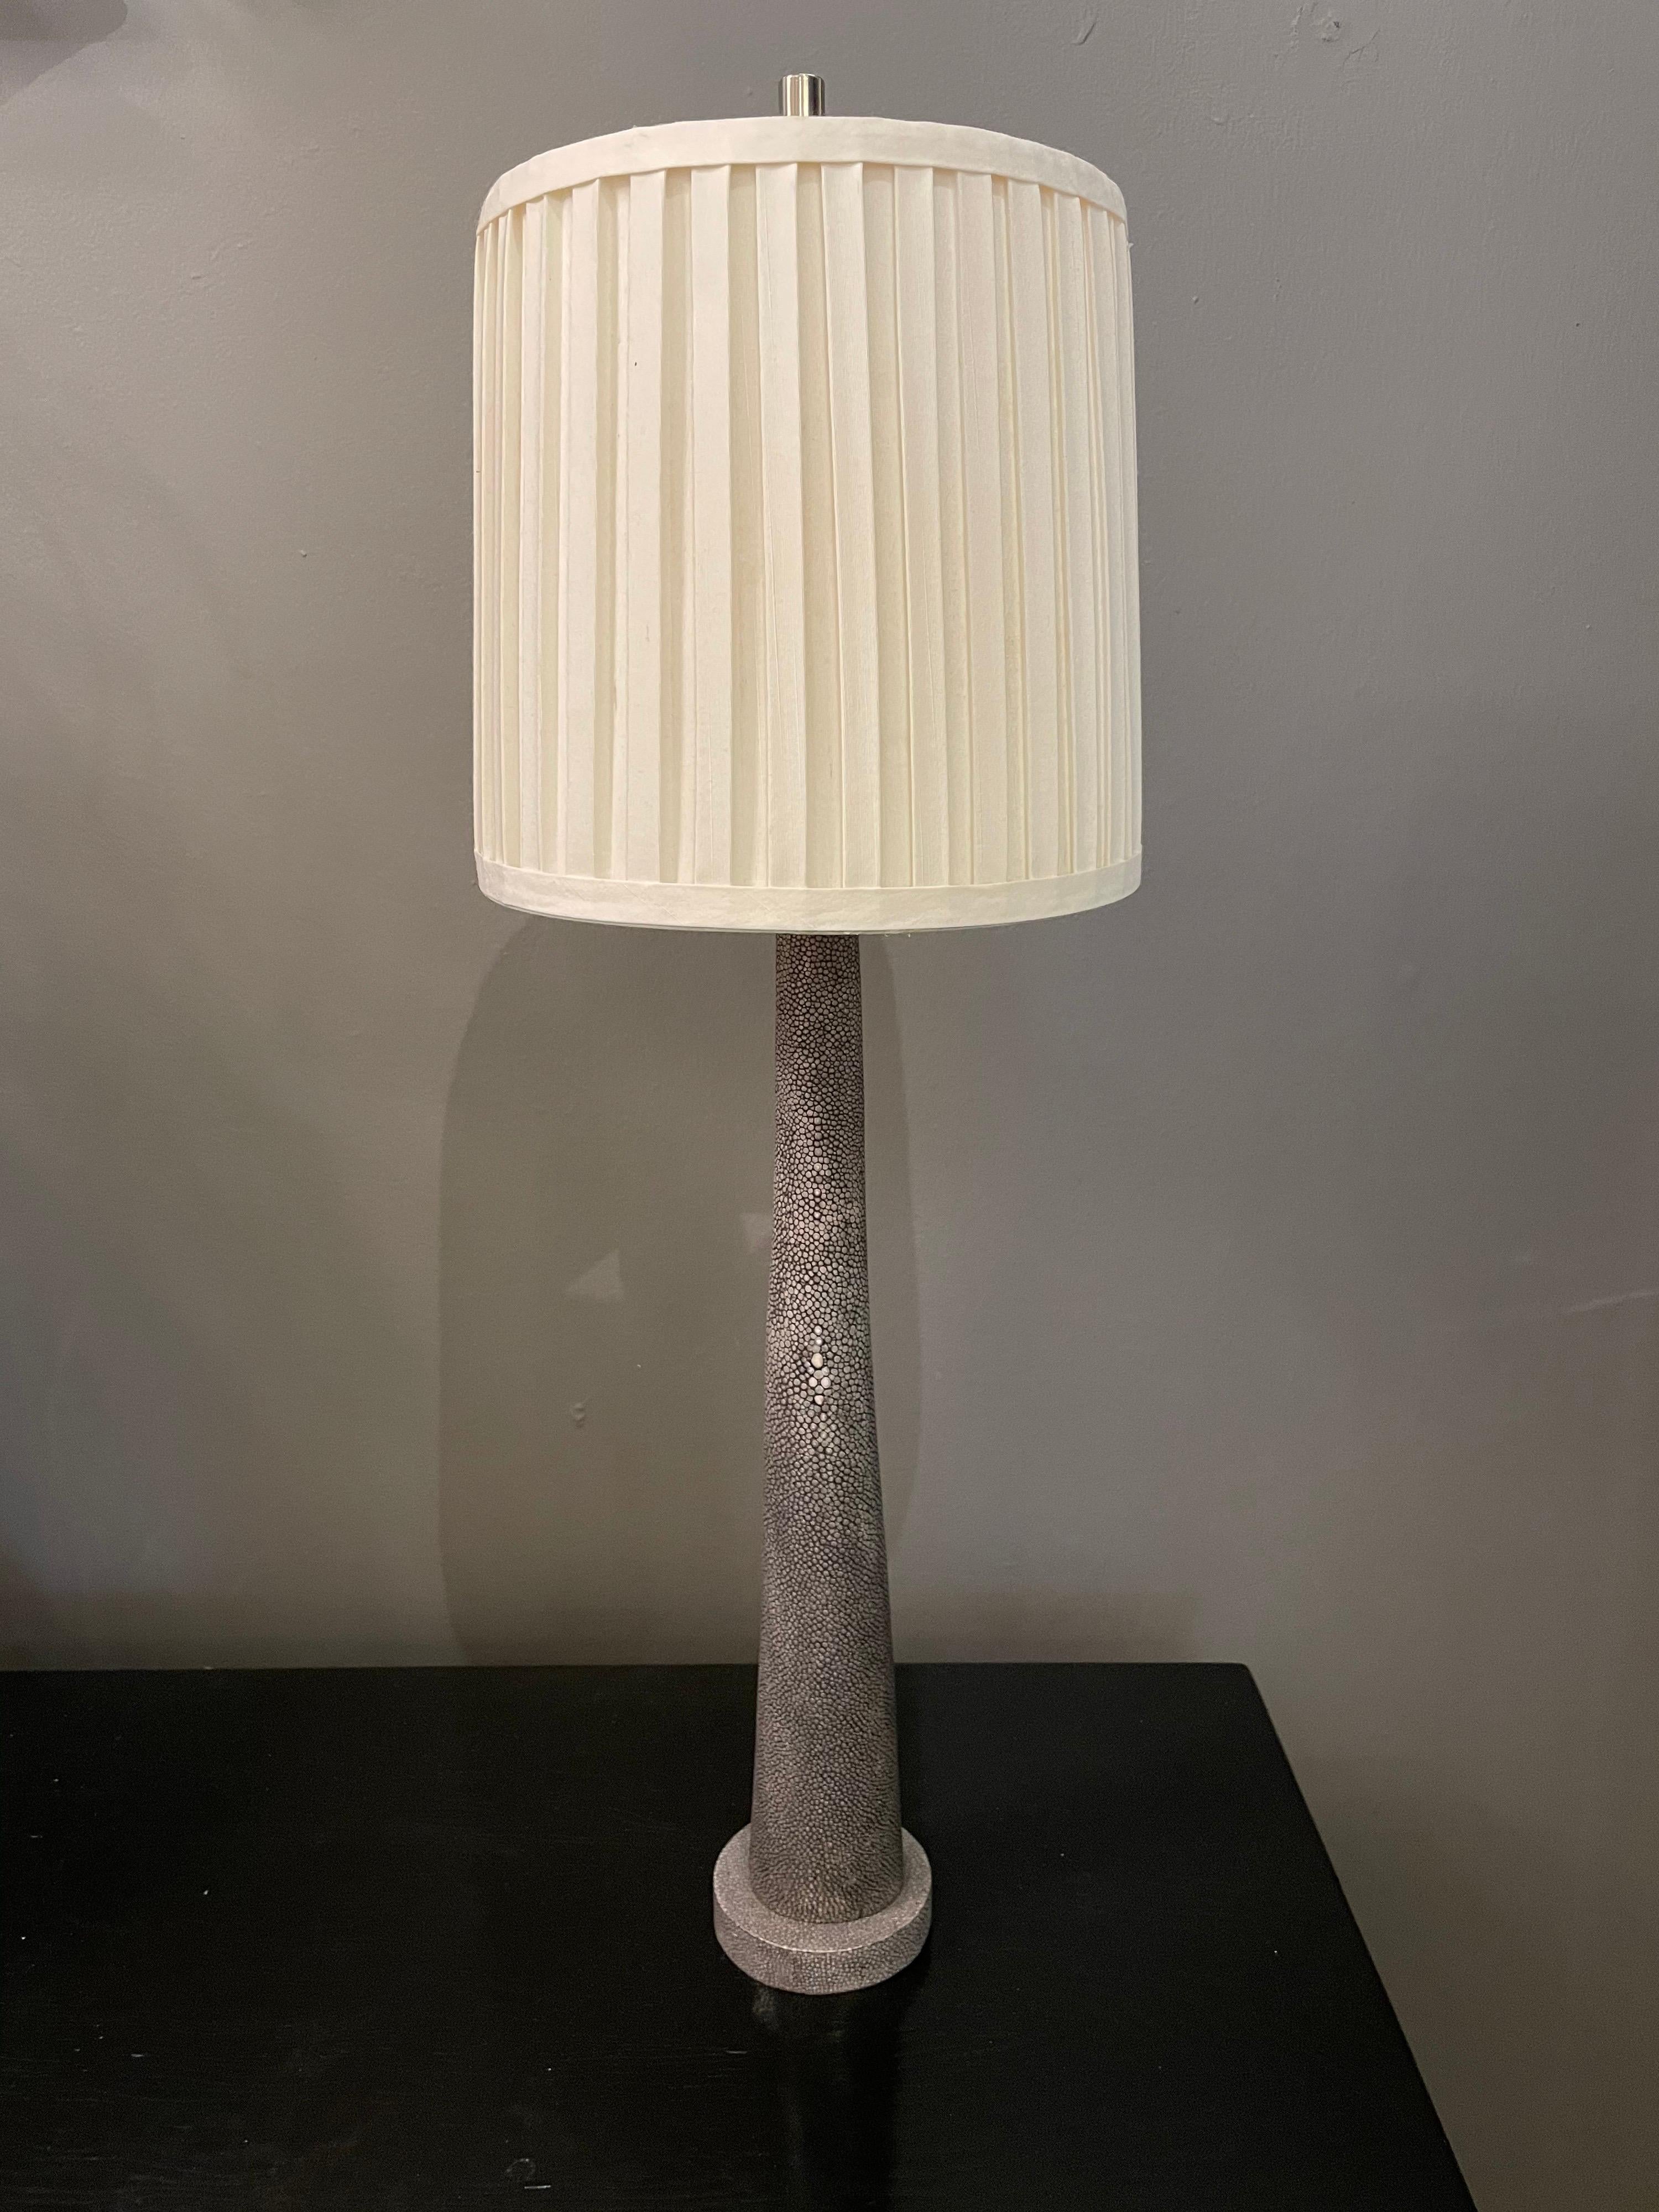 Clad in charcoal gray shagreen from base to top, this twig style lamp is very organic. Shade shown here is included upon request.